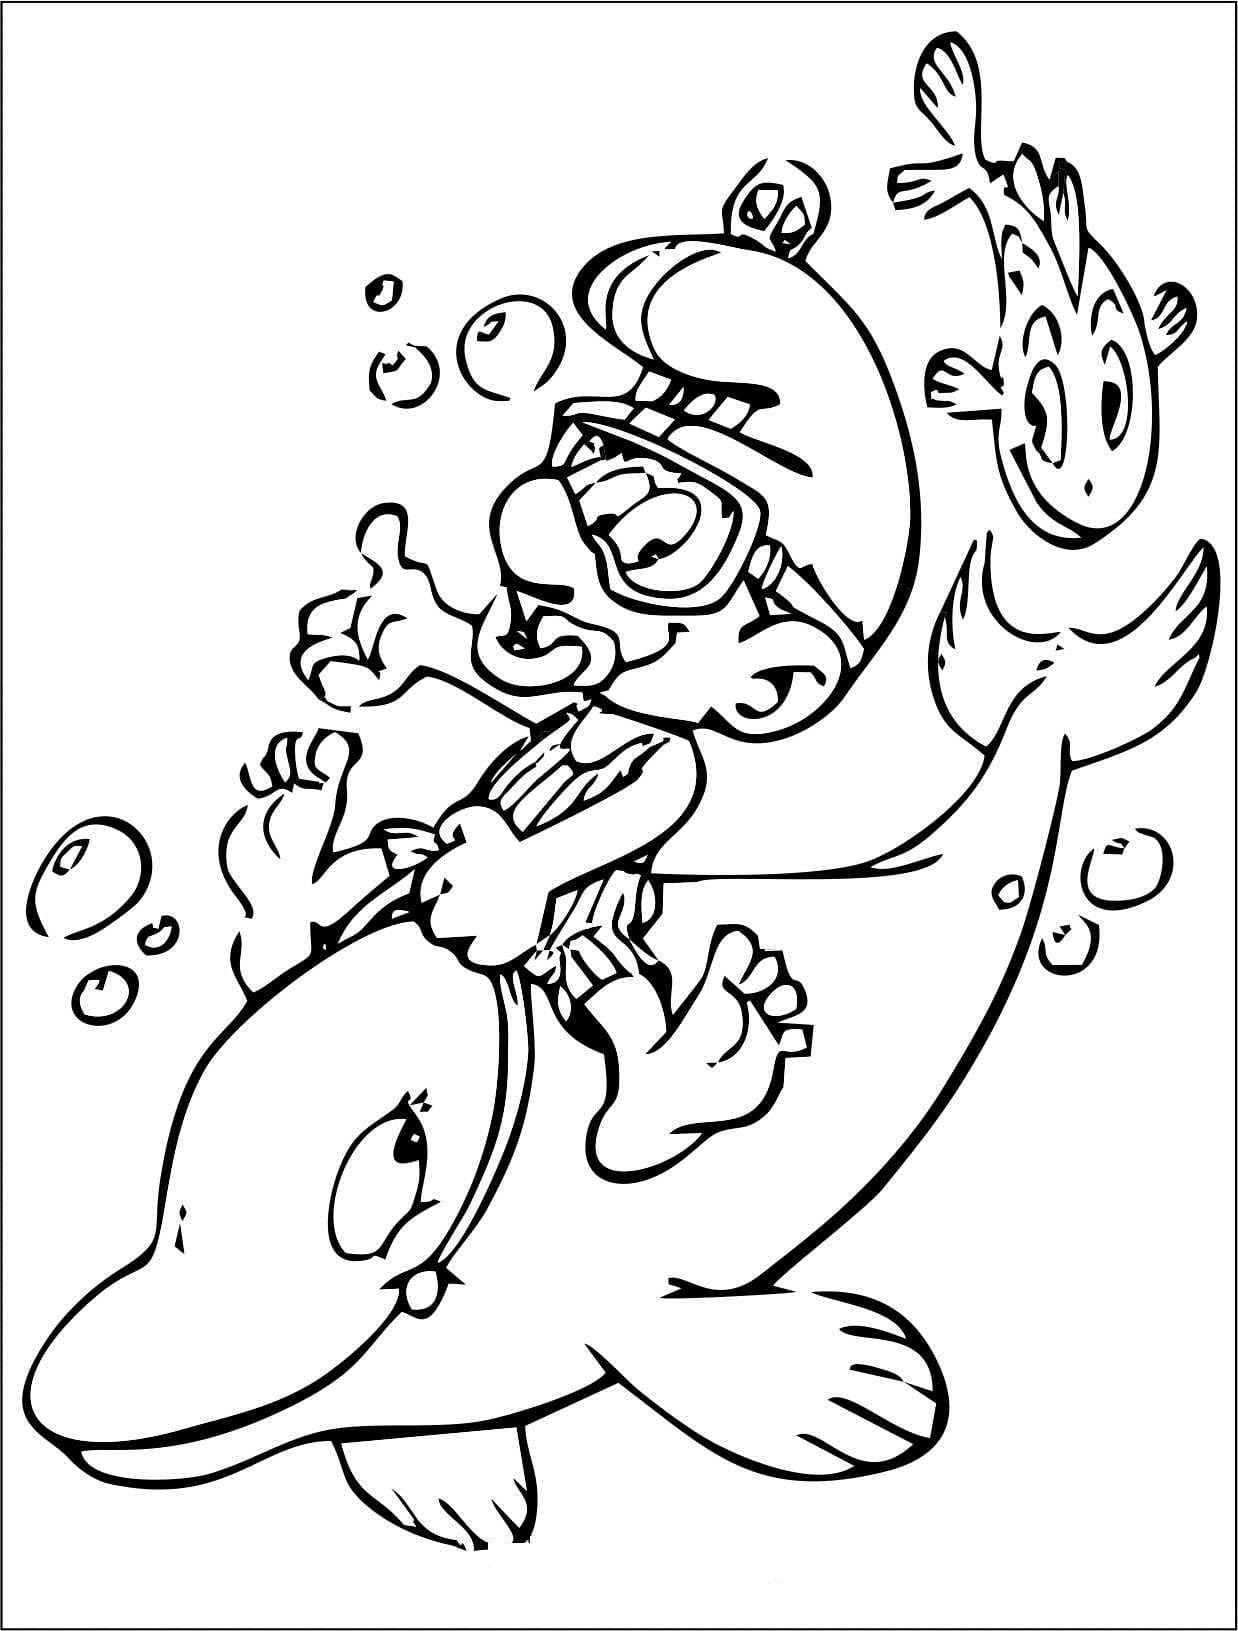 The smurfs outline coloring page